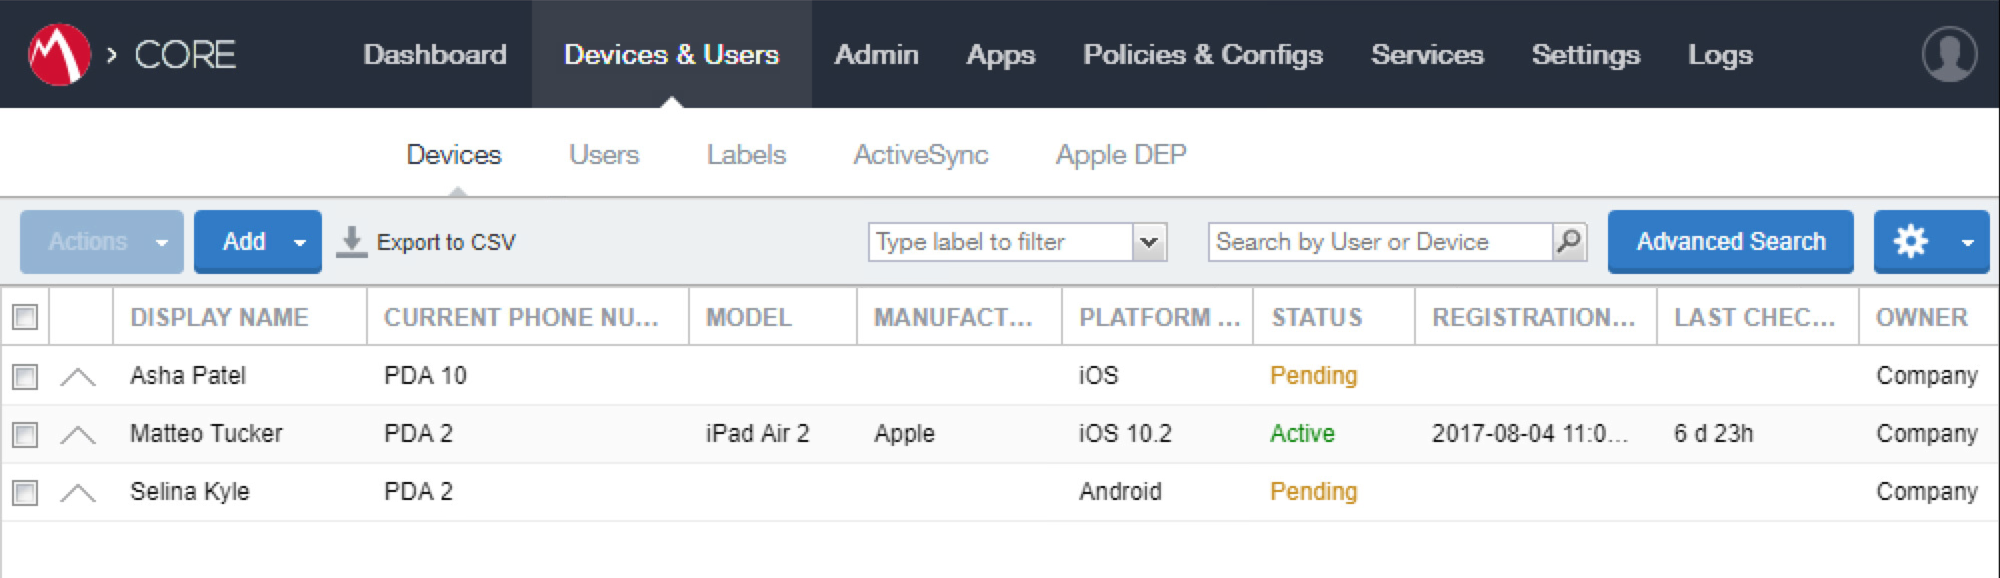 Shows all pending and active device registrations in MobileIron Core.